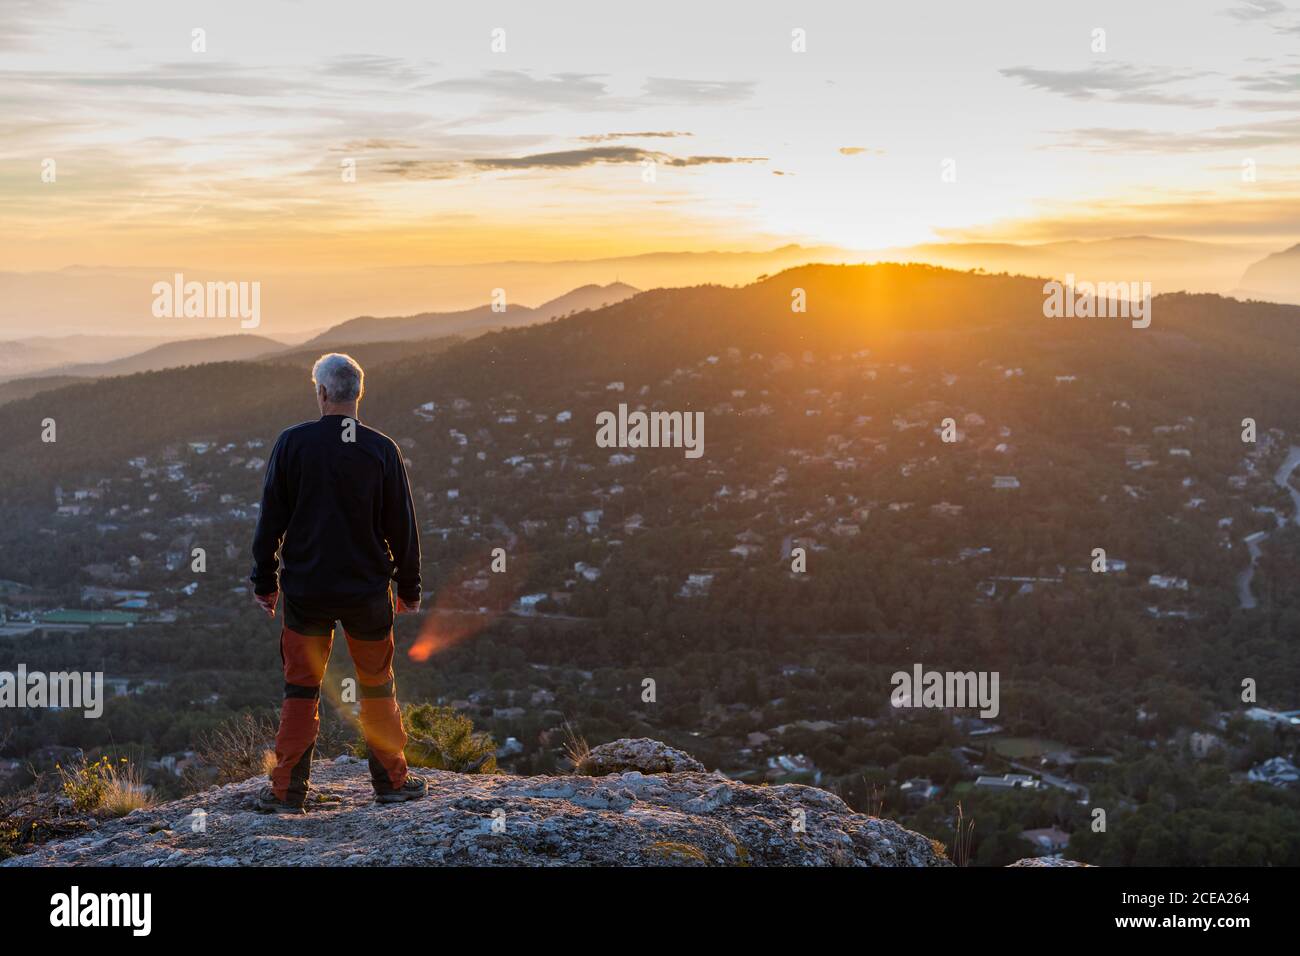 Back view of elderly man in casual outfit sitting on rocky cliff and admiring view of majestic mountains and beautiful evening sky Stock Photo